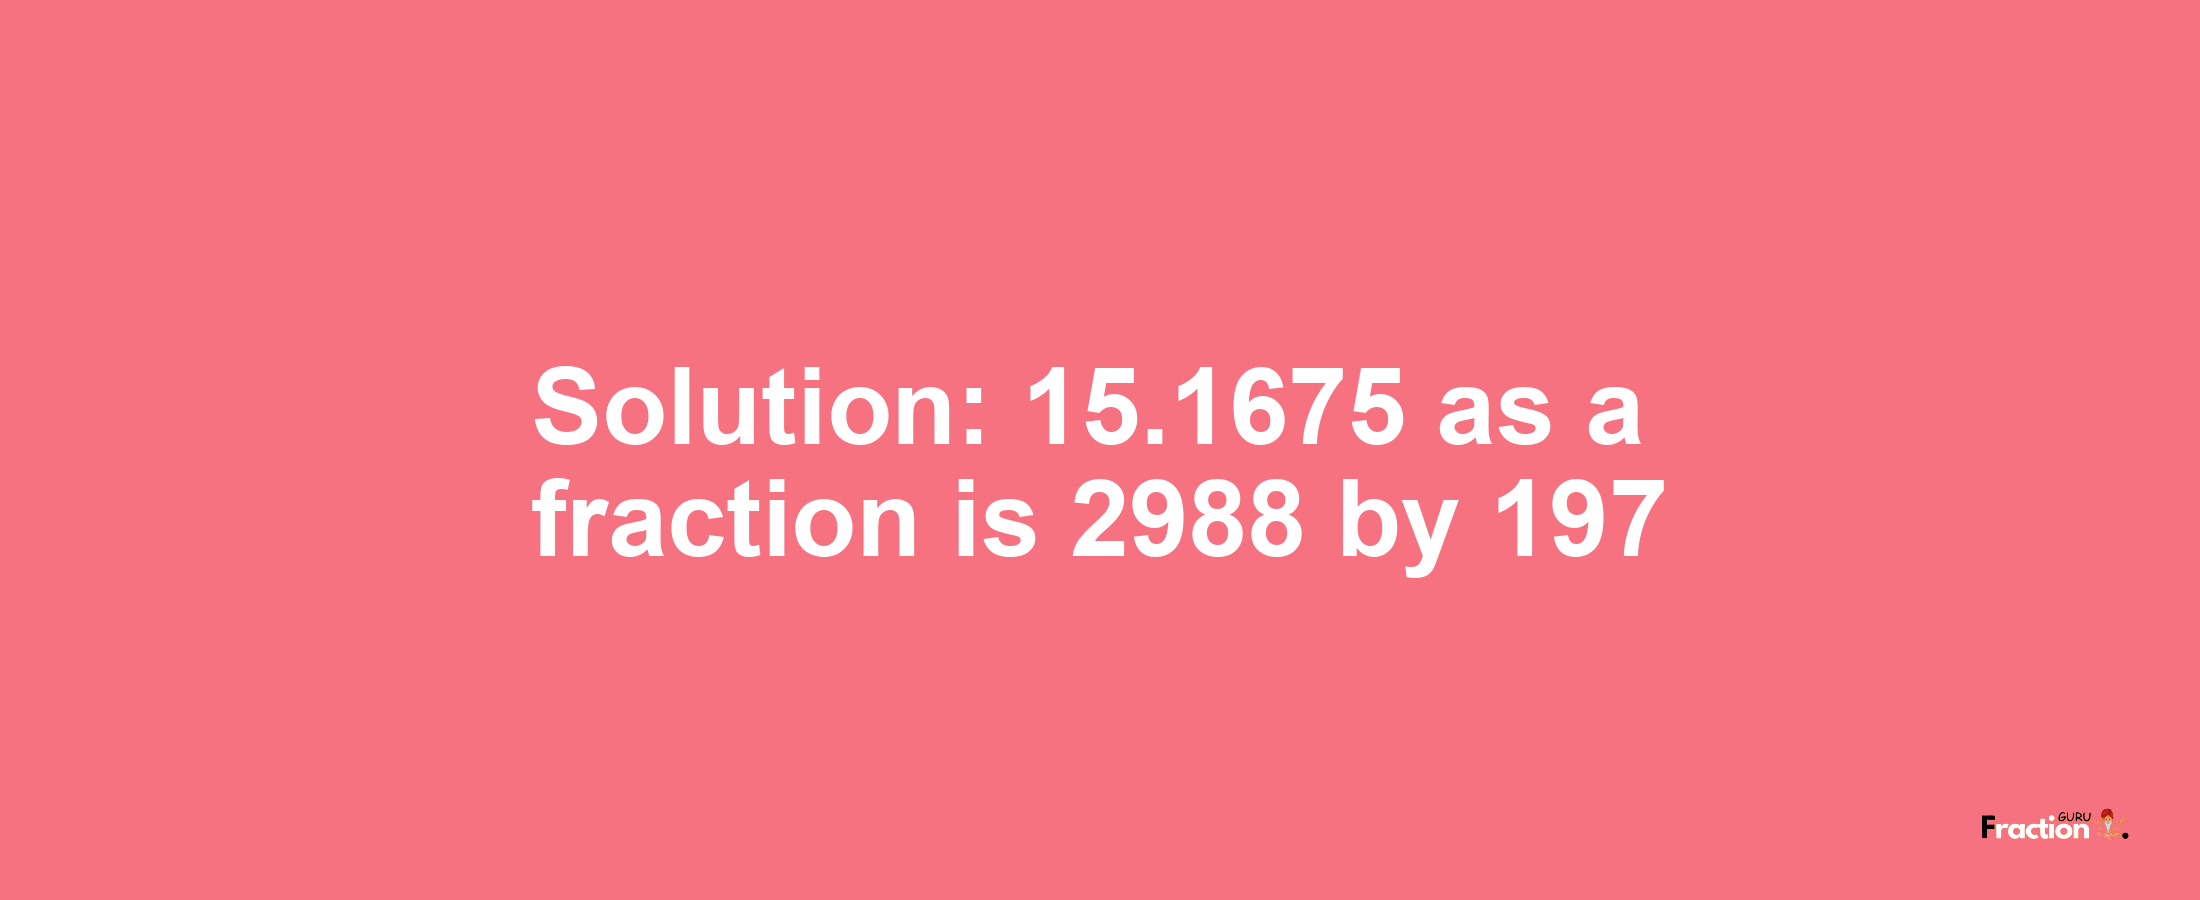 Solution:15.1675 as a fraction is 2988/197